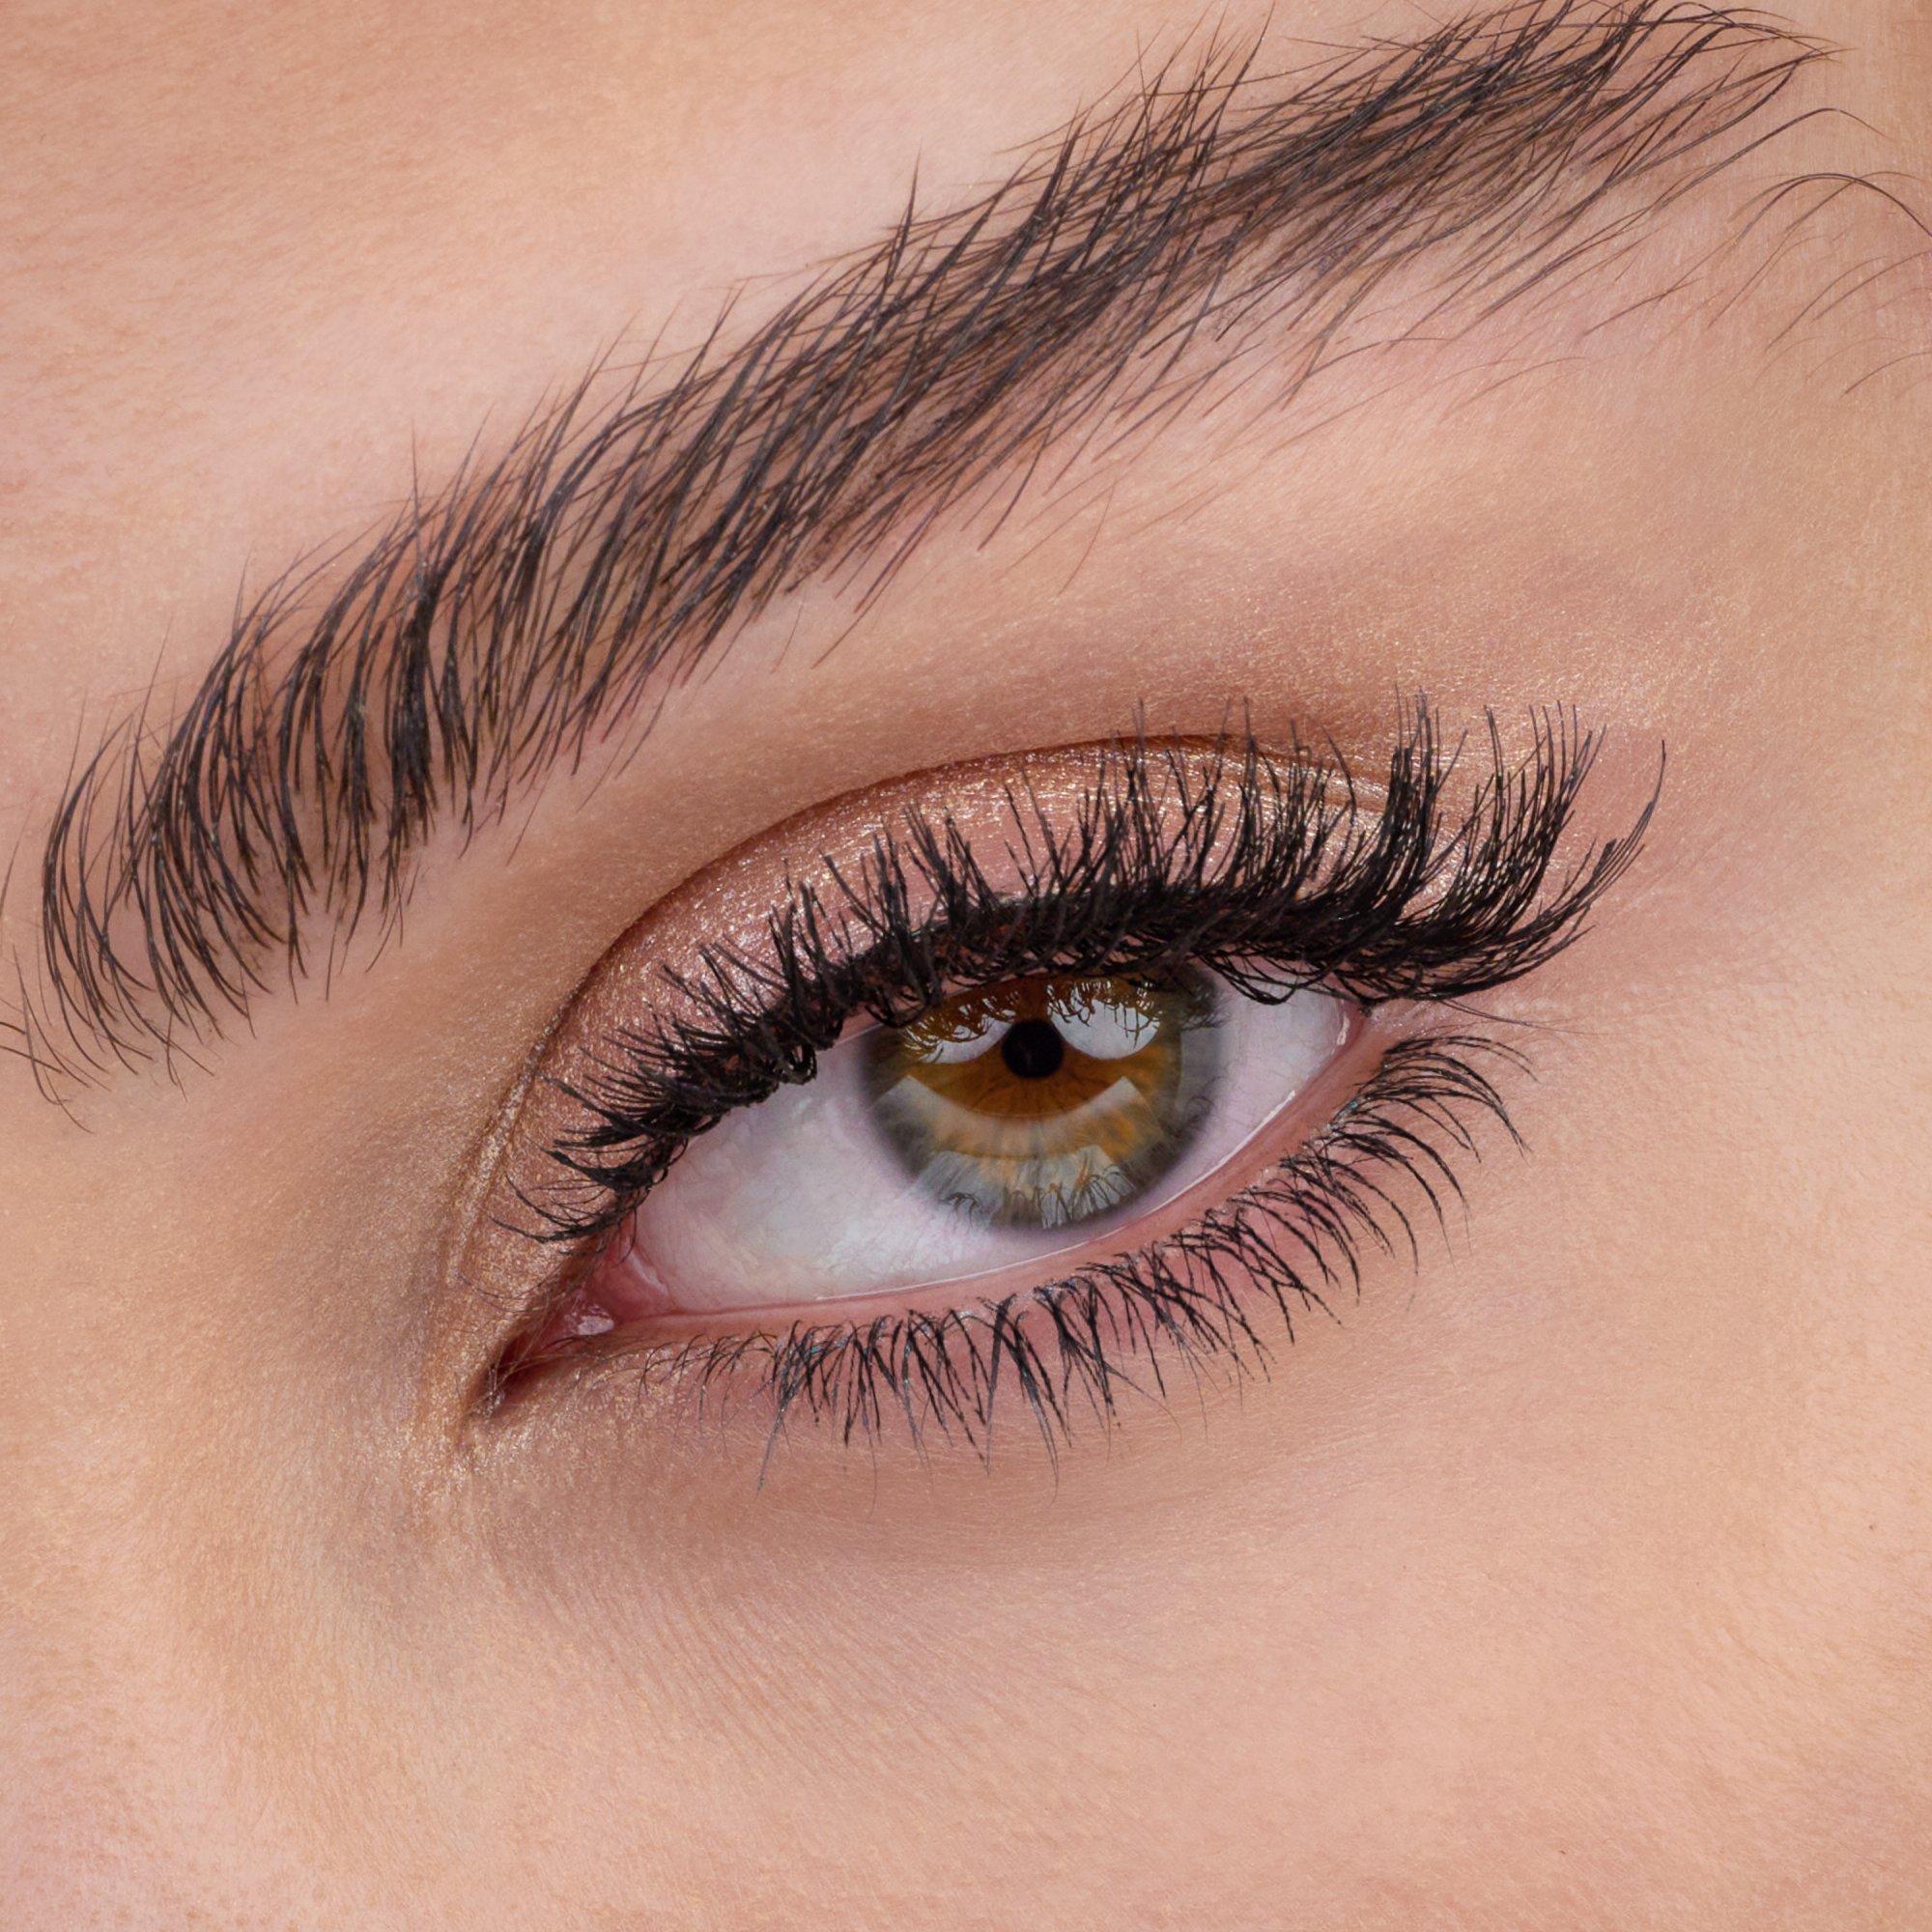 Faked Everyday Natural Lashes faux cils